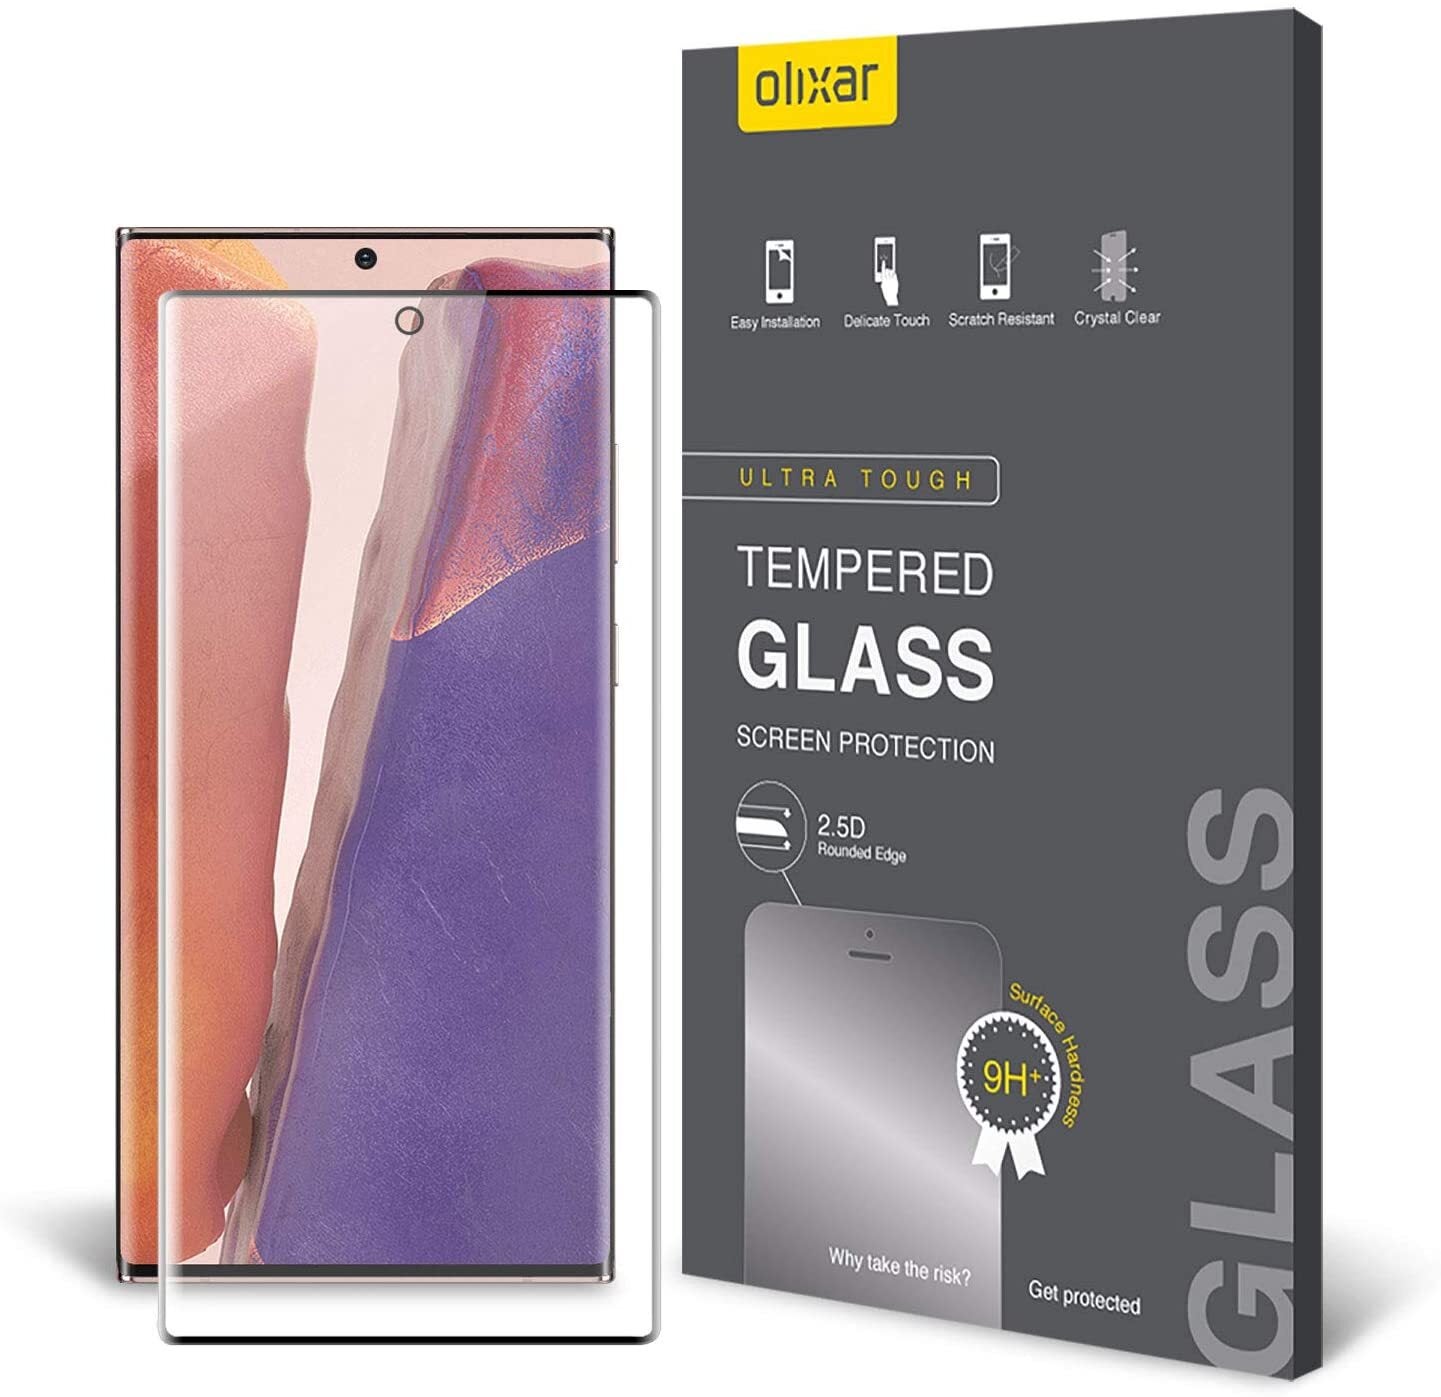 ［1+2 Pack］Galaxy Note 20 Ultra Screen Protector and Lens Protector Tempered Glass Screen Protector for Samsung Galaxy Note 20 Ultra 5G Privacy Anti Spy 9H Hardness 3D Edge Coverage 6.9 